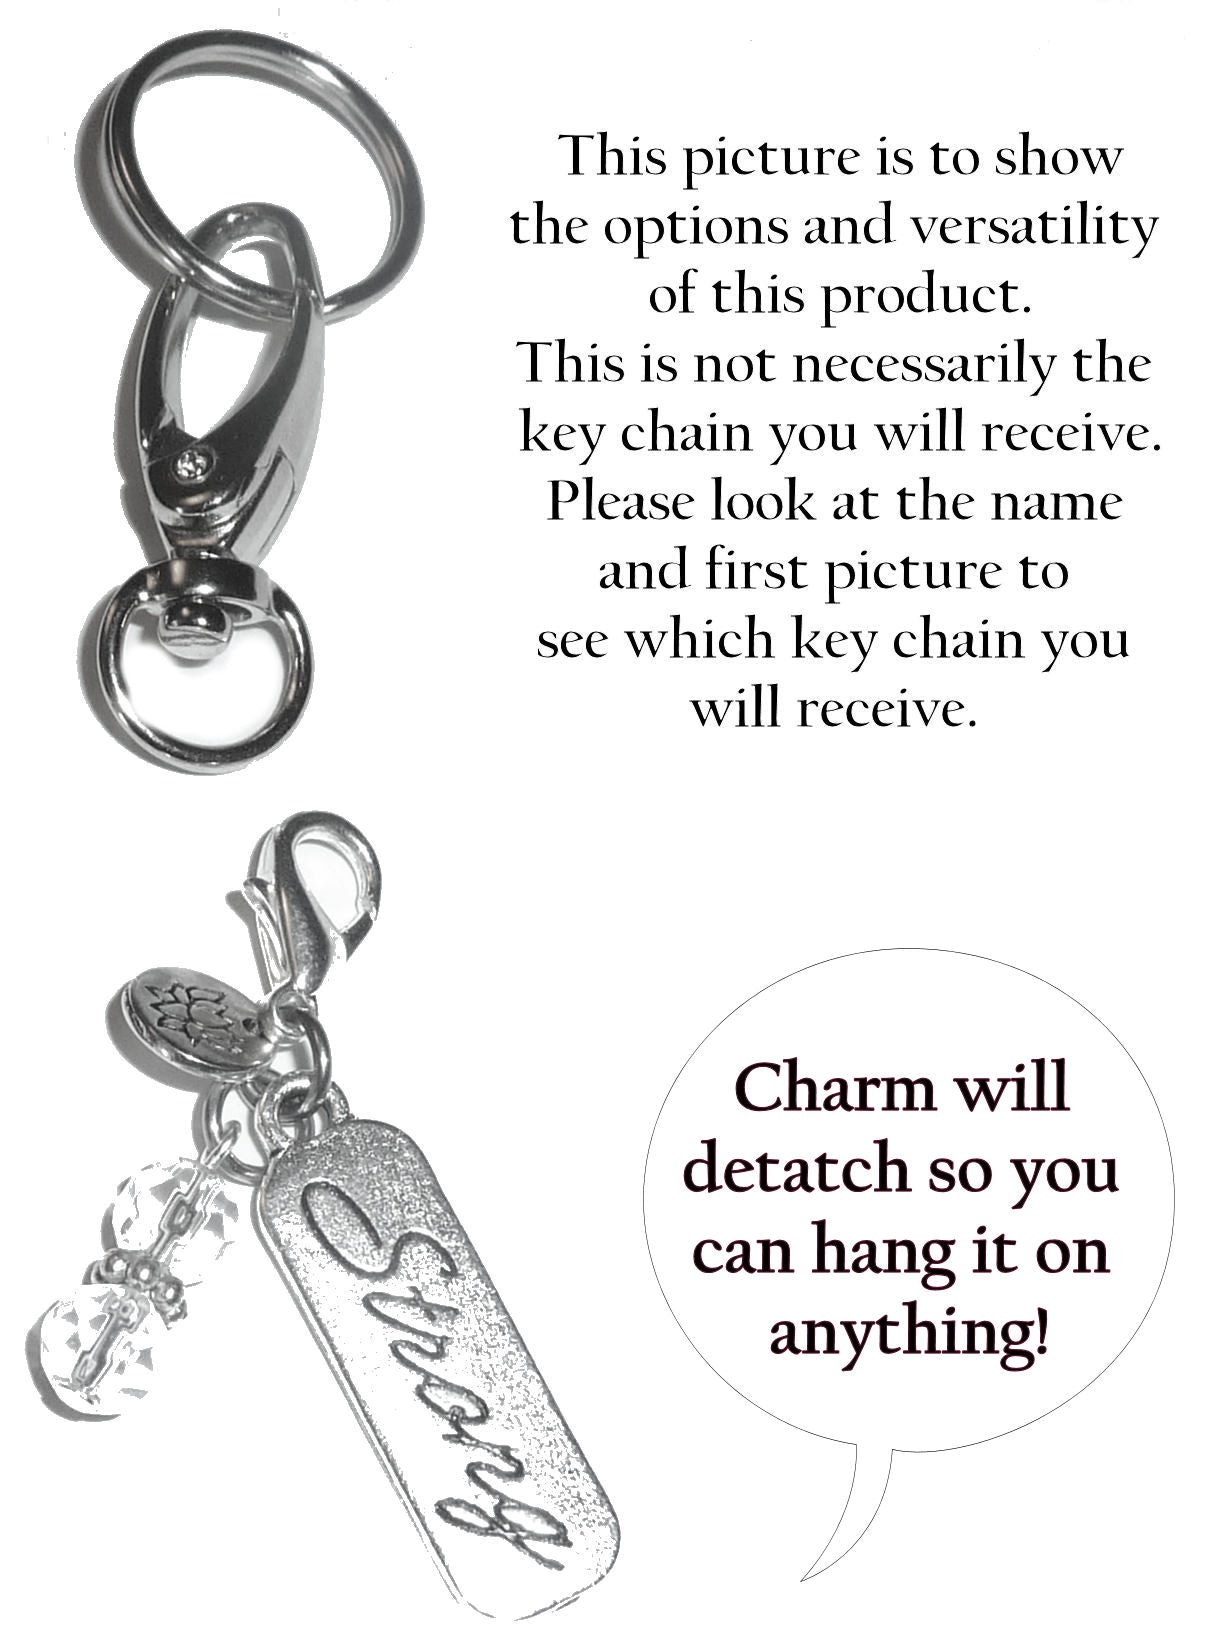 (Princess) Charm Key Chain Ring, Women's Purse or Necklace Charm, Comes in a Gift Box!